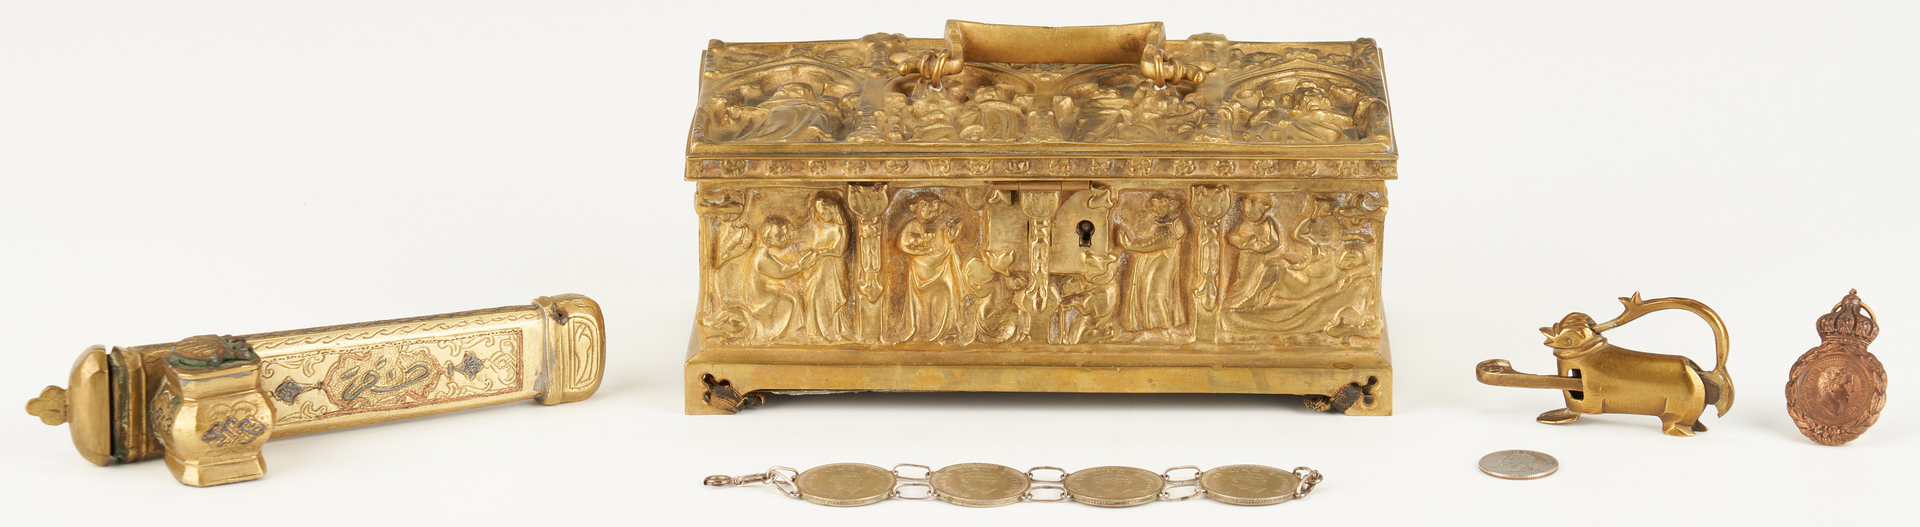 Lot 243: 5 Decorative Bronze and Brass Items, incl. Neo Gothic Box